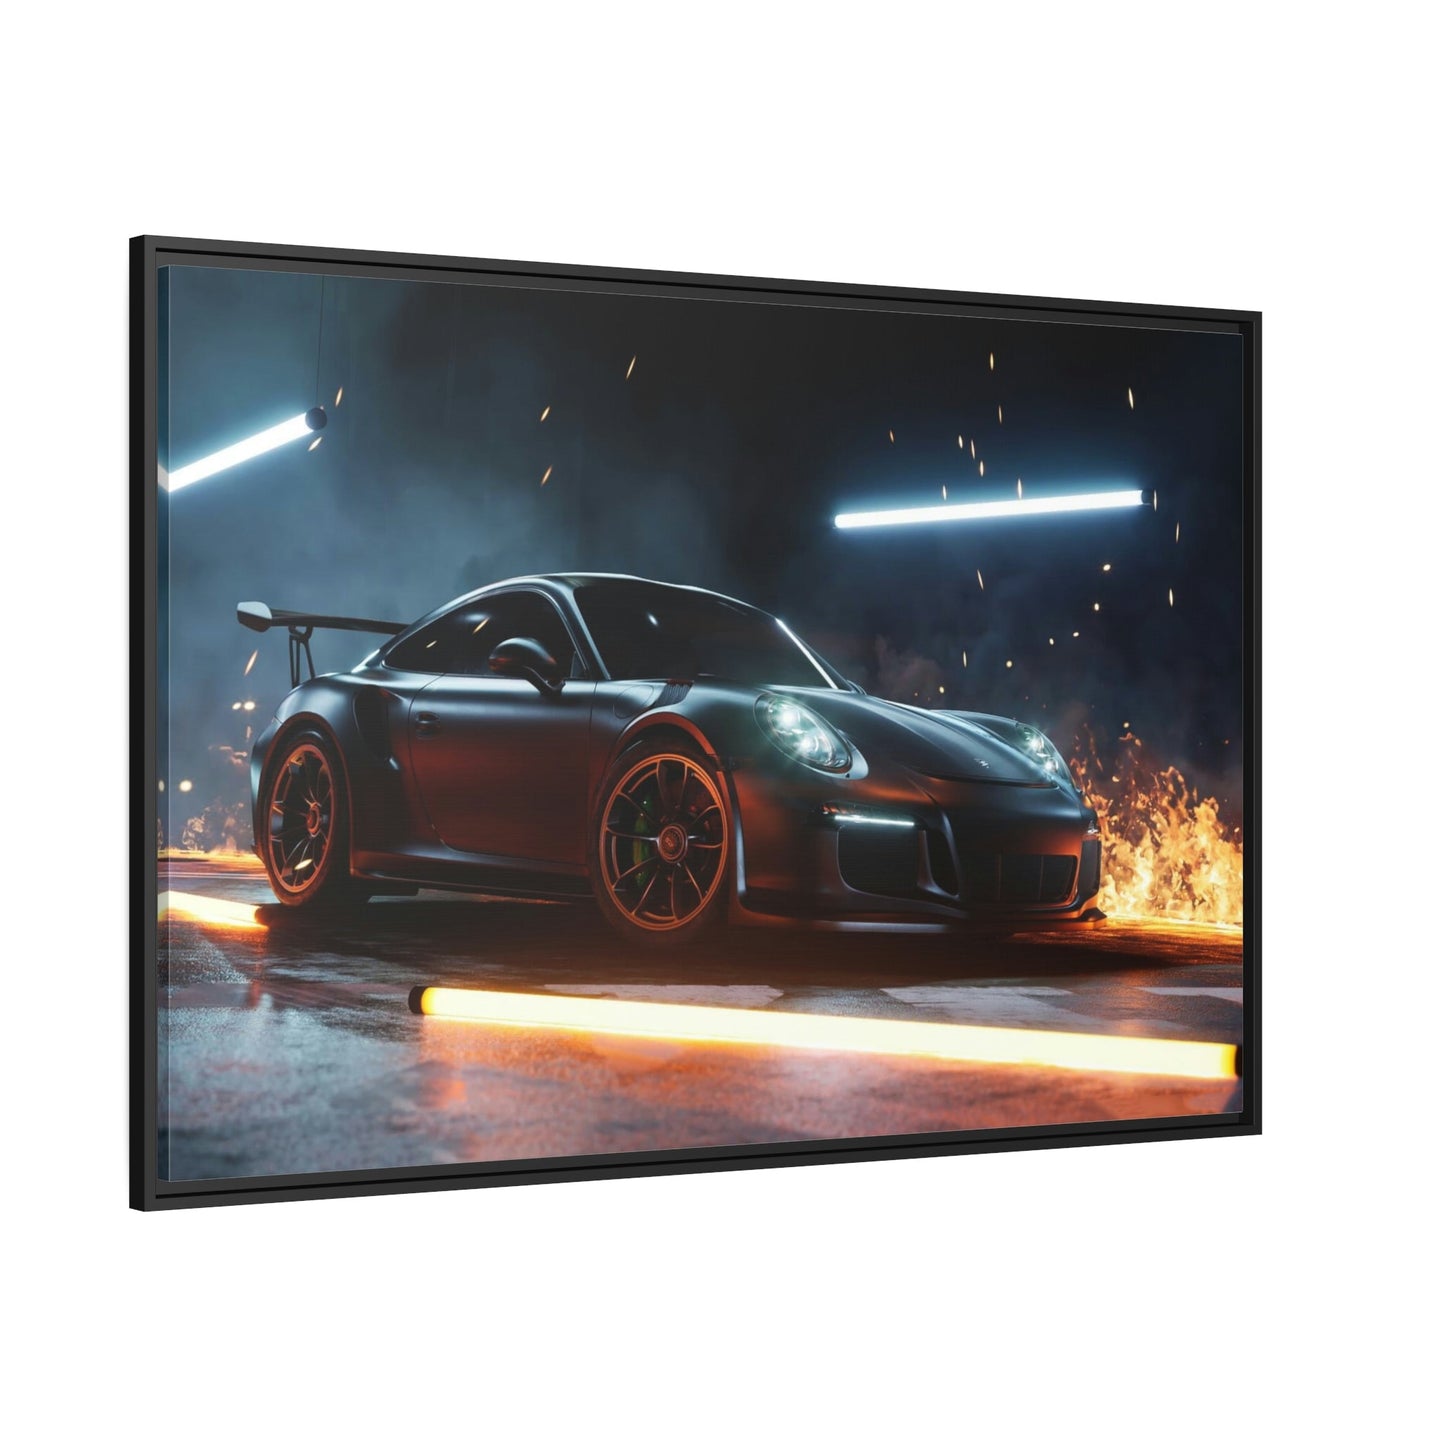 Beauty in Motion: Natural Canvas & Poster Print of a Porsche in Action